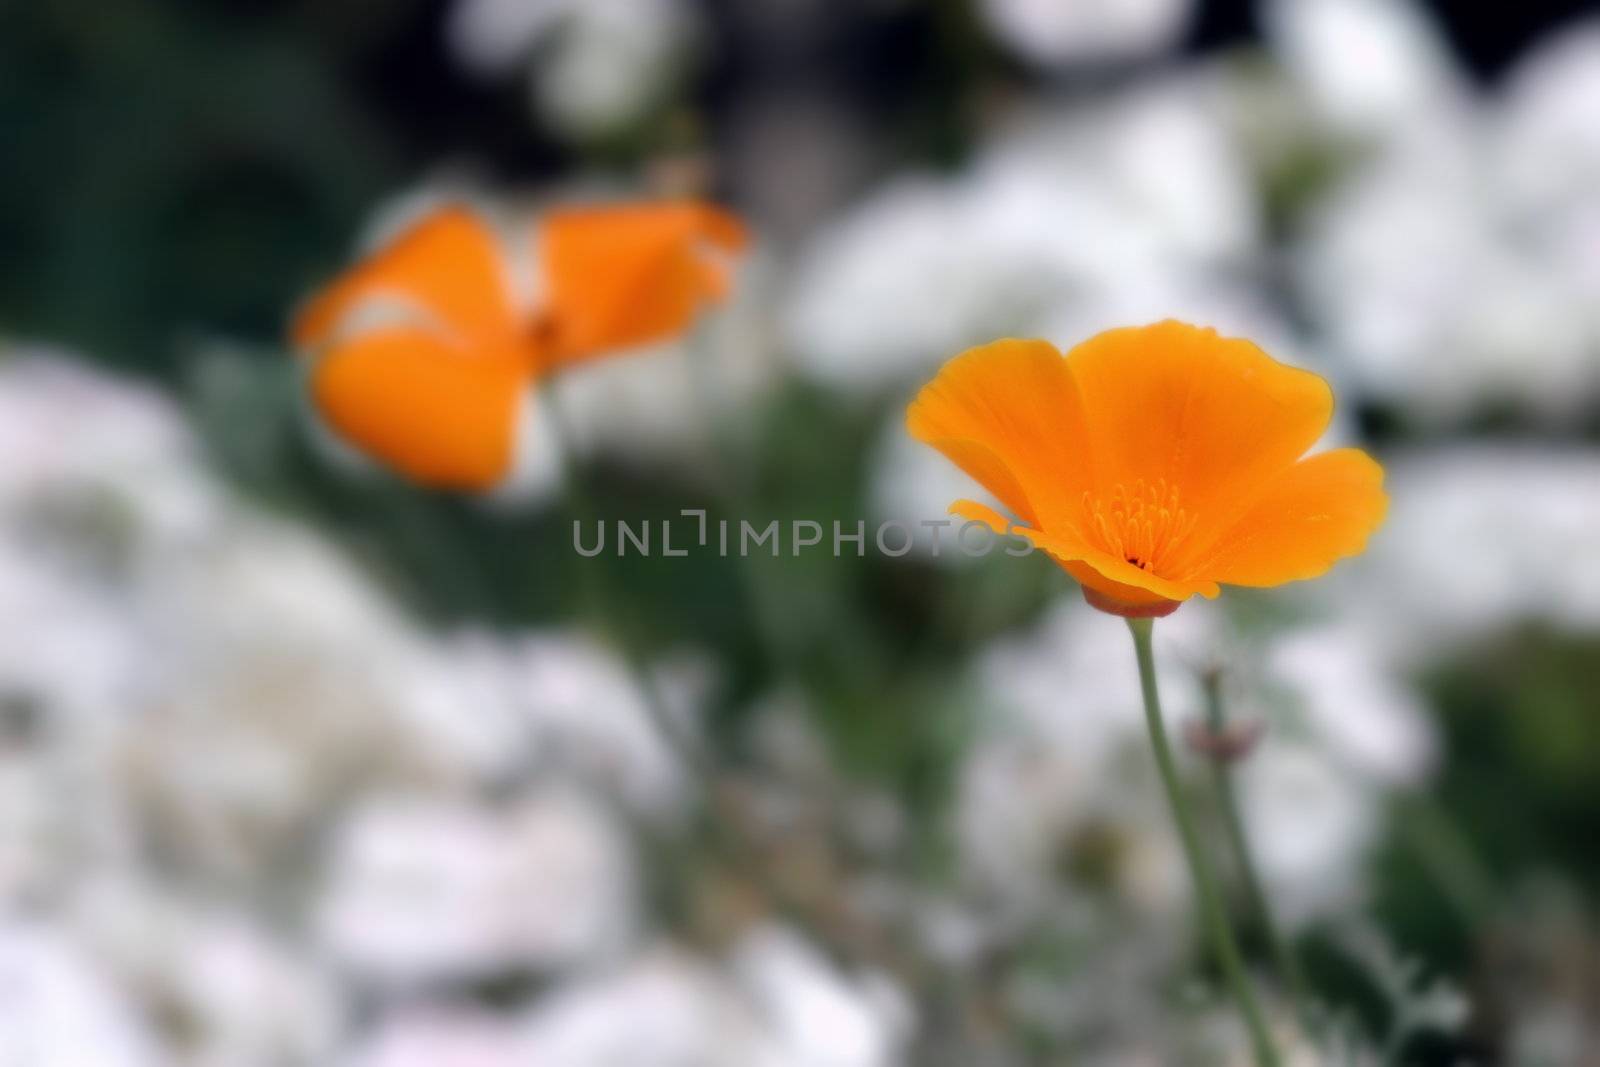 Orange California Poppy with white blurred flower in the background.